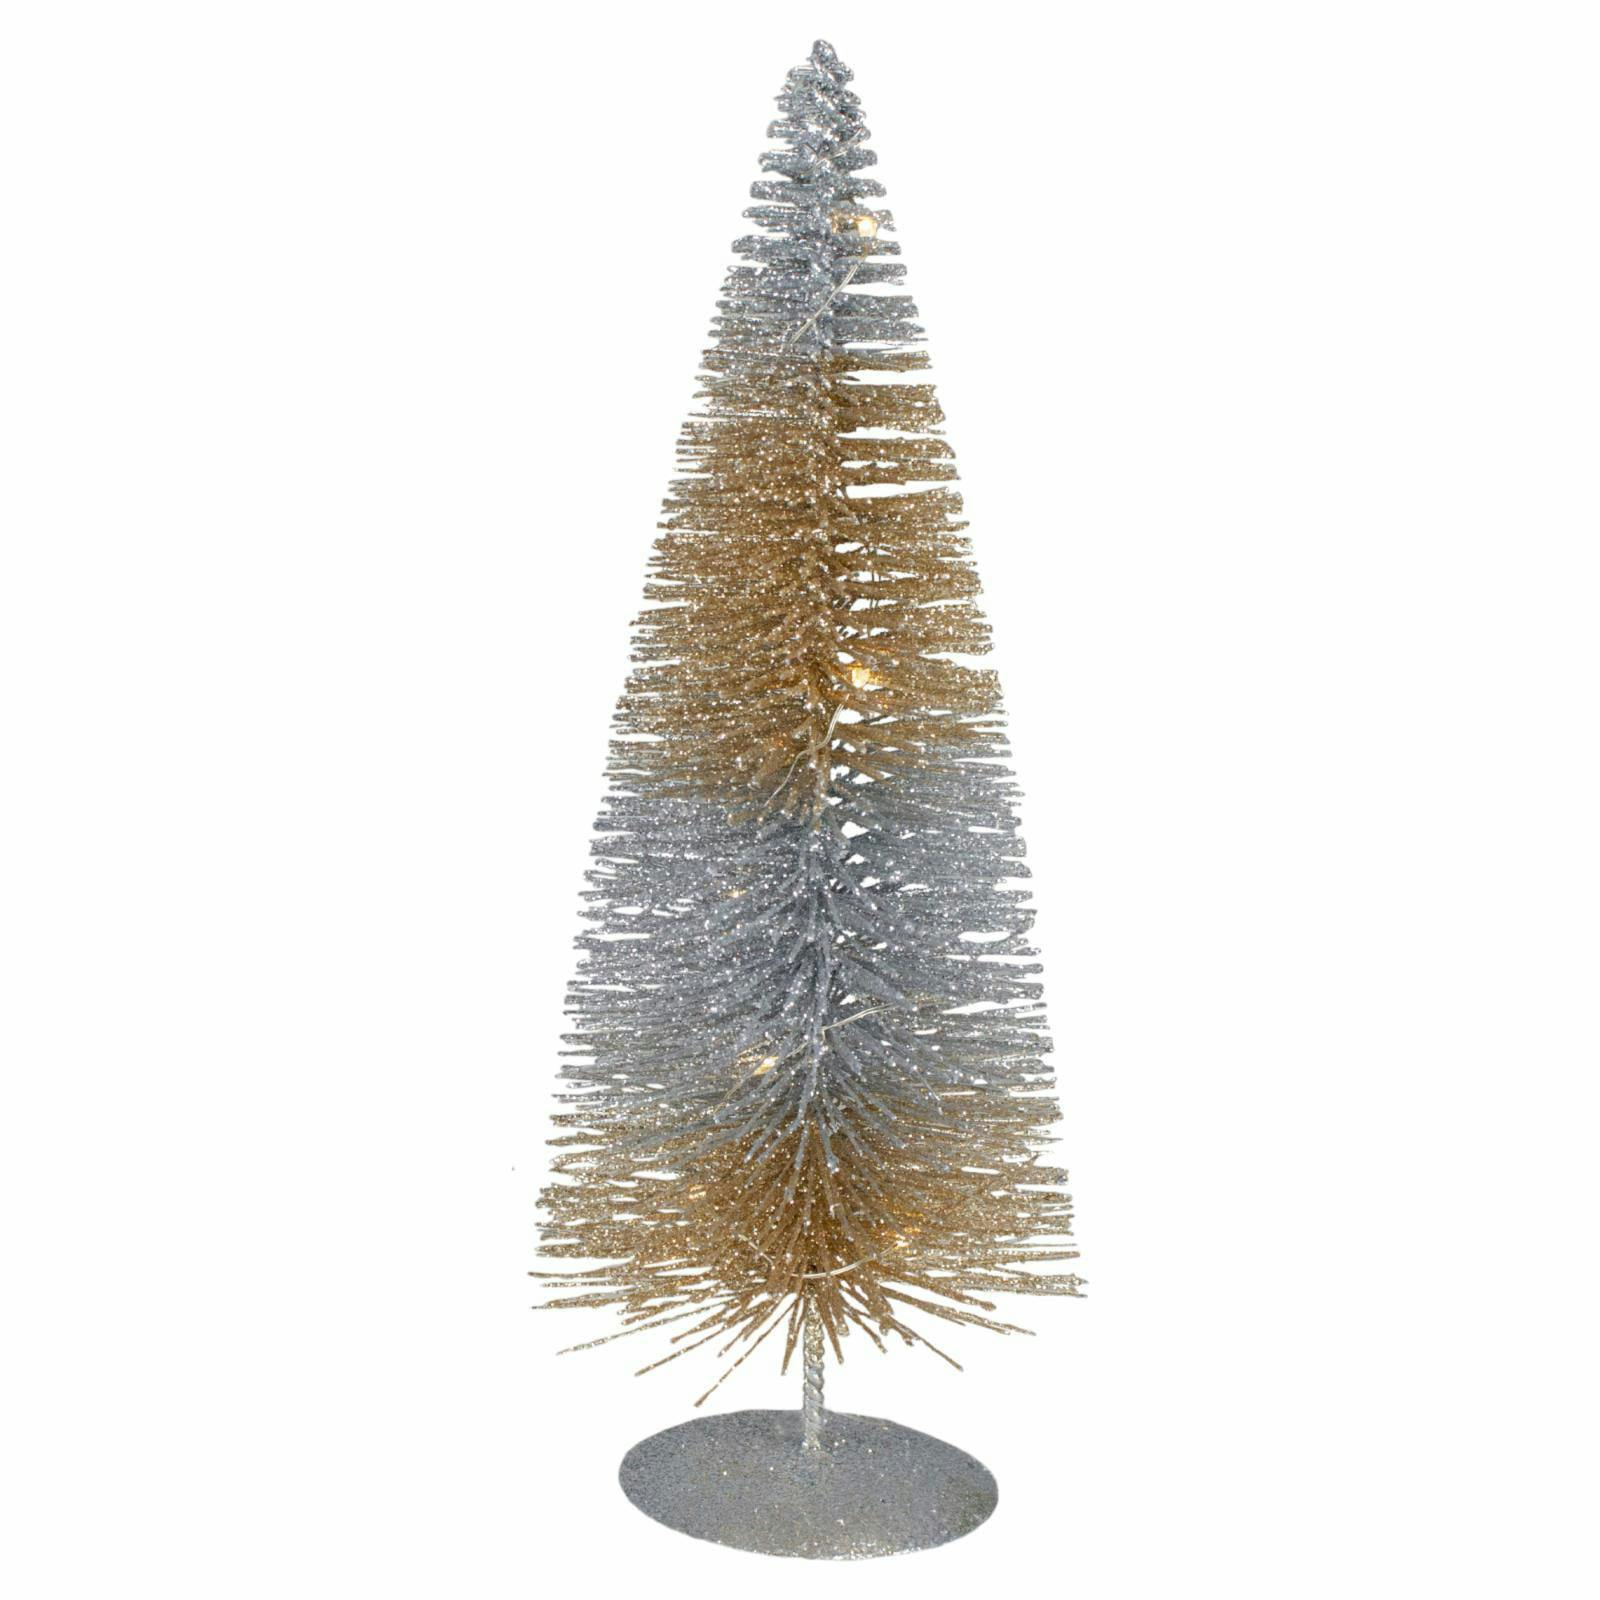 Glittered Silver and Gold Sisal 10" Mini Christmas Tree with LED Lights